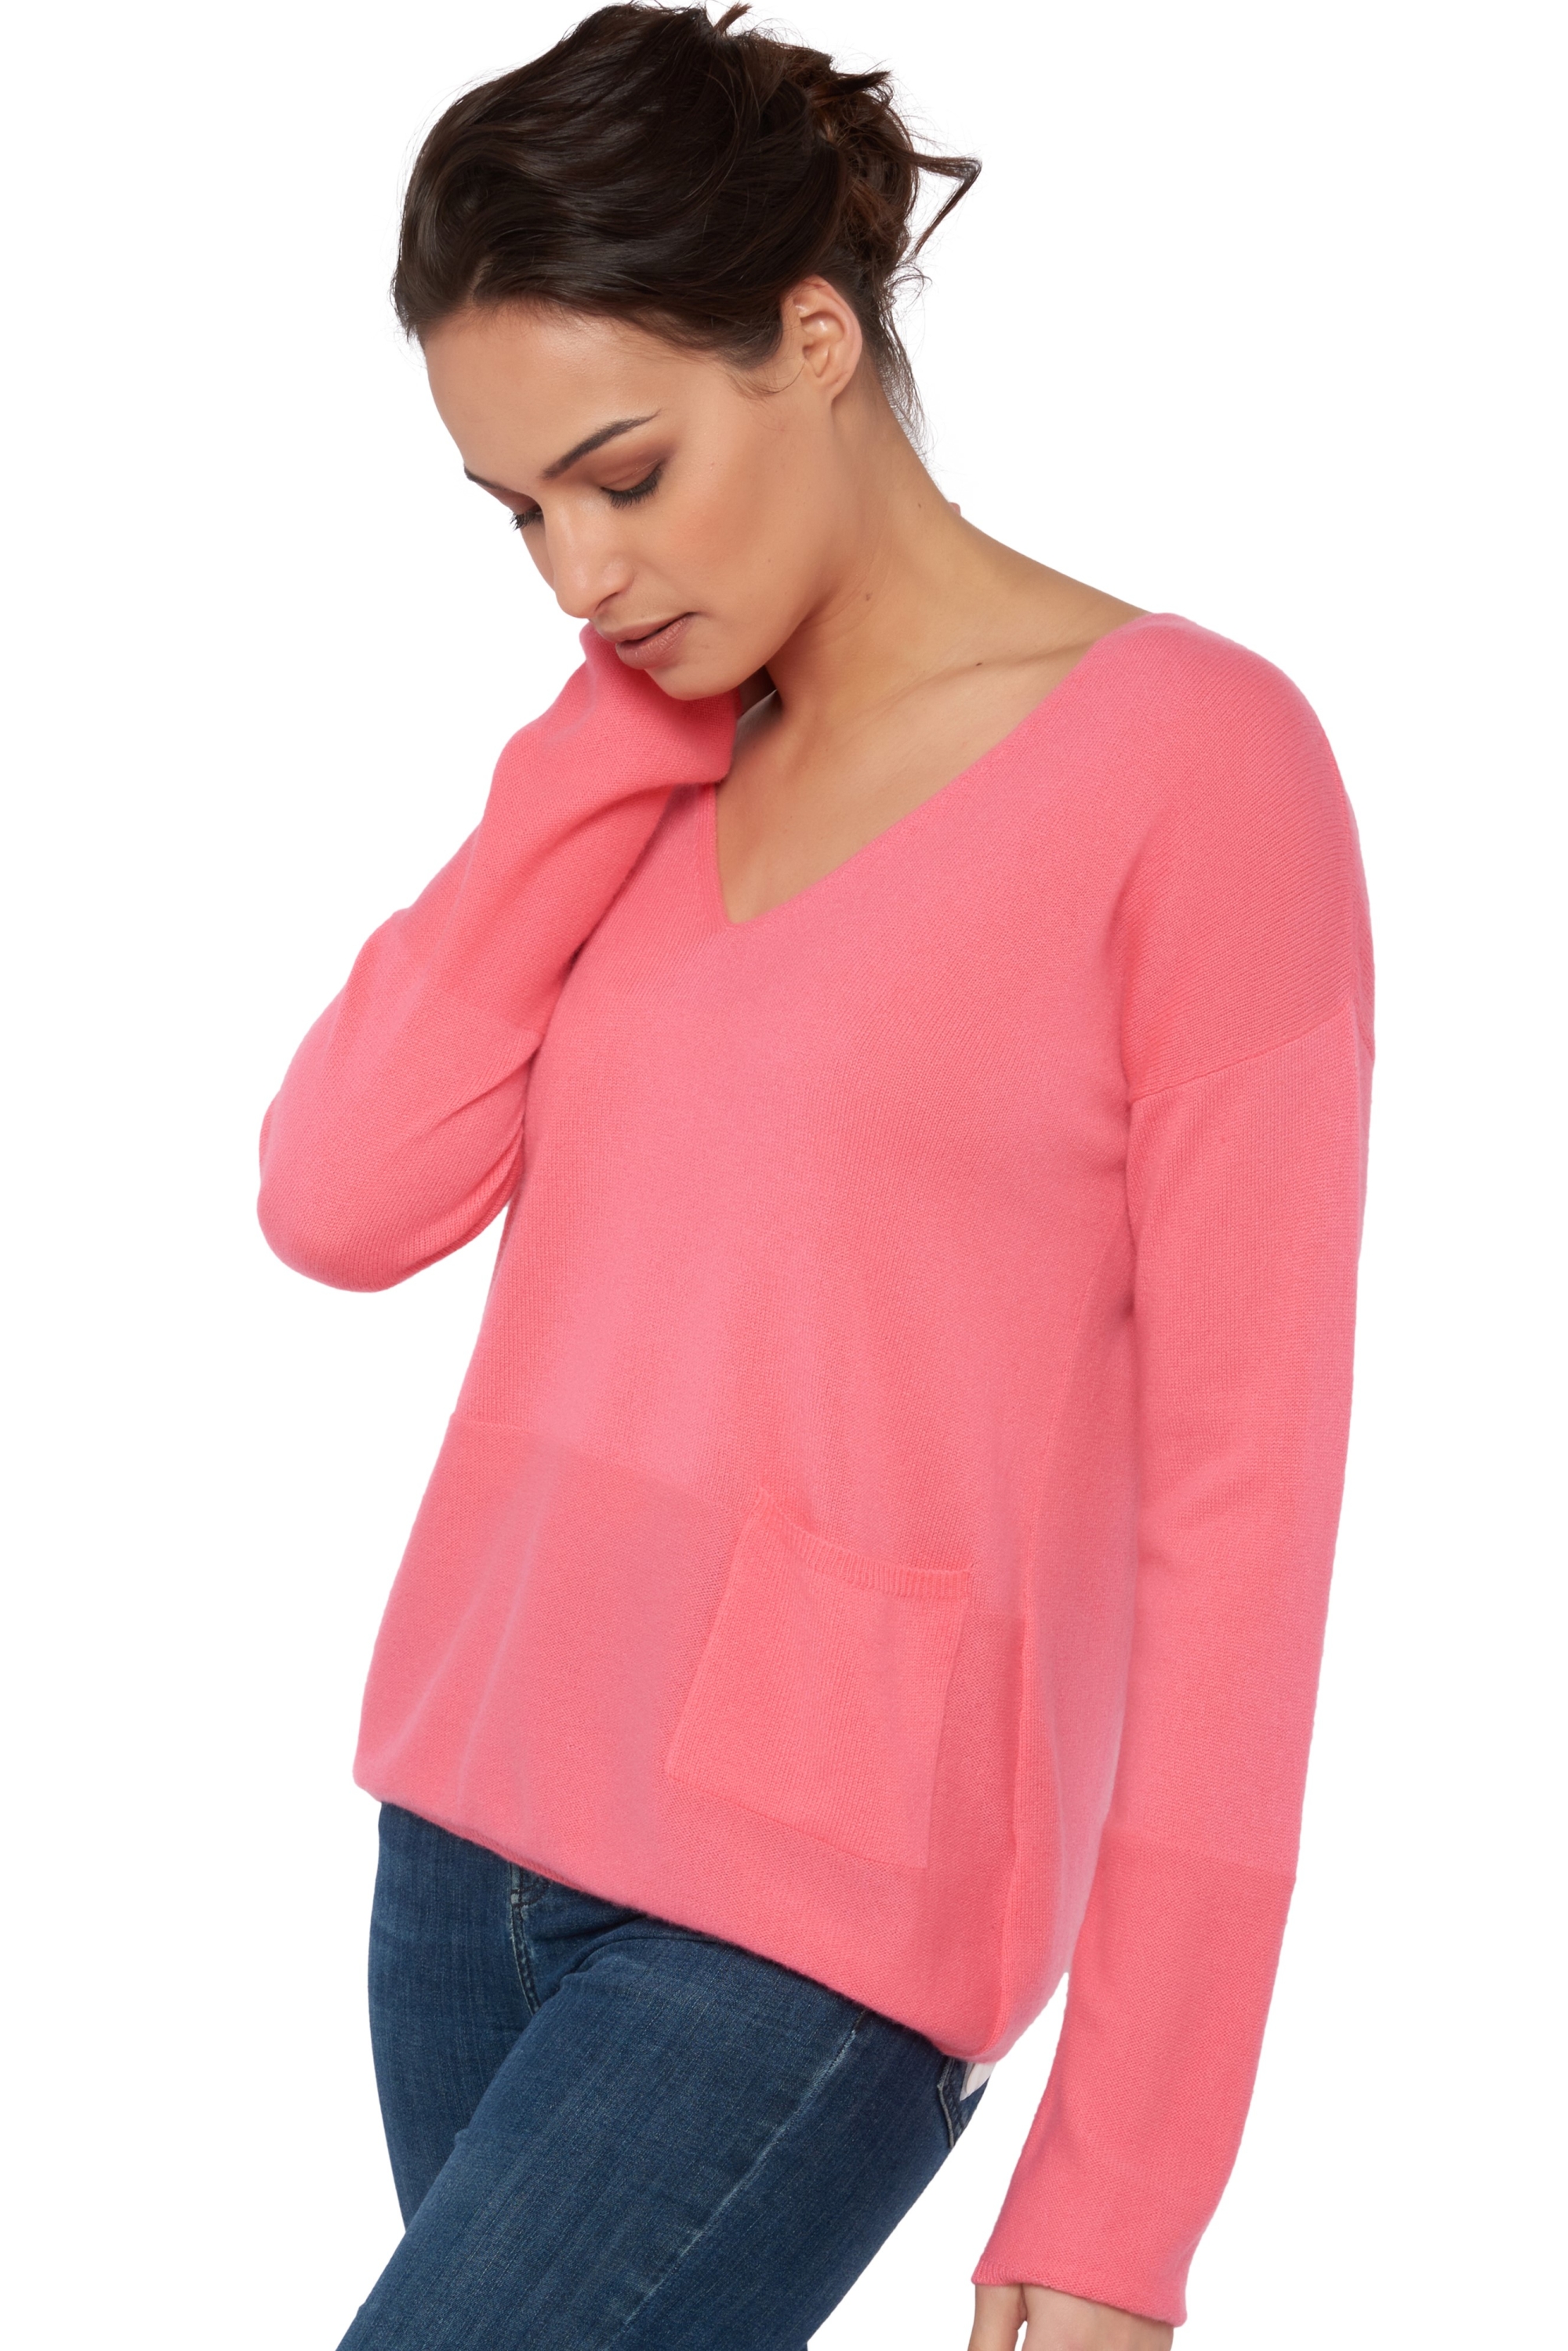 Cashmere ladies spring summer collection uliana blushing s